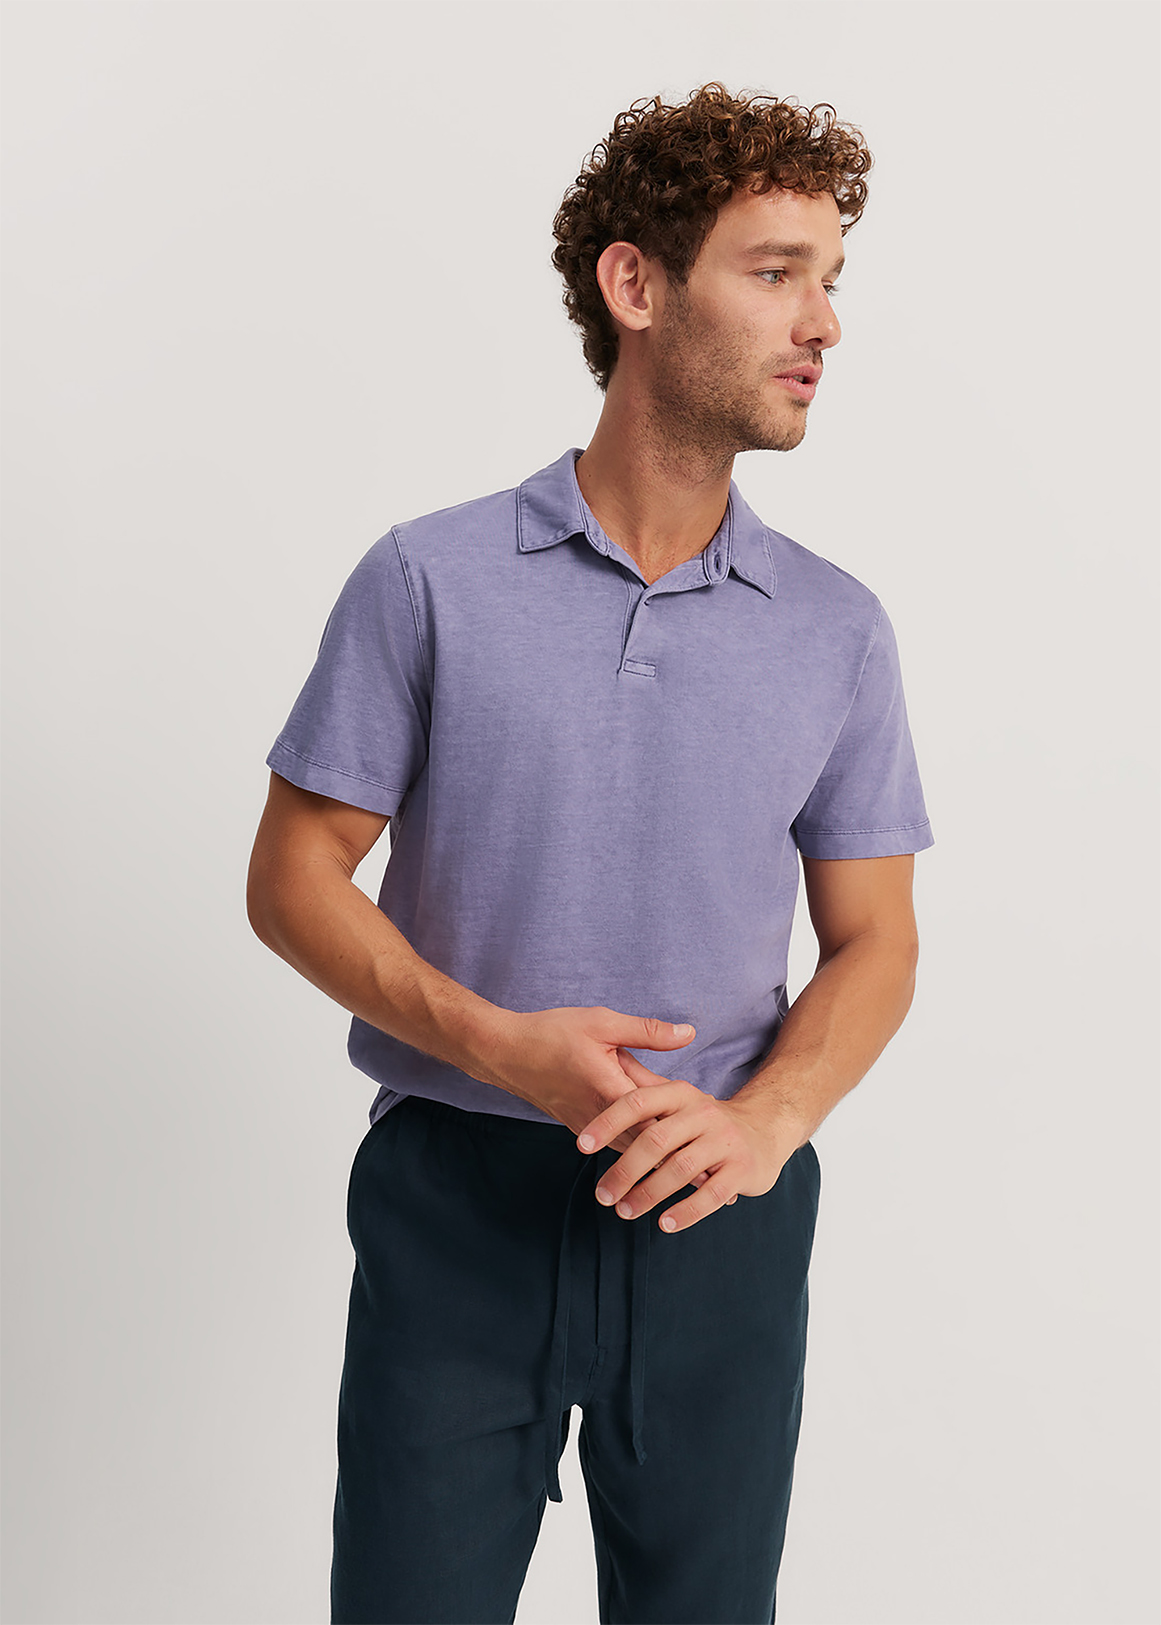 Organically Grown Cotton Garment Dyed Polo | Woolworths.co.za